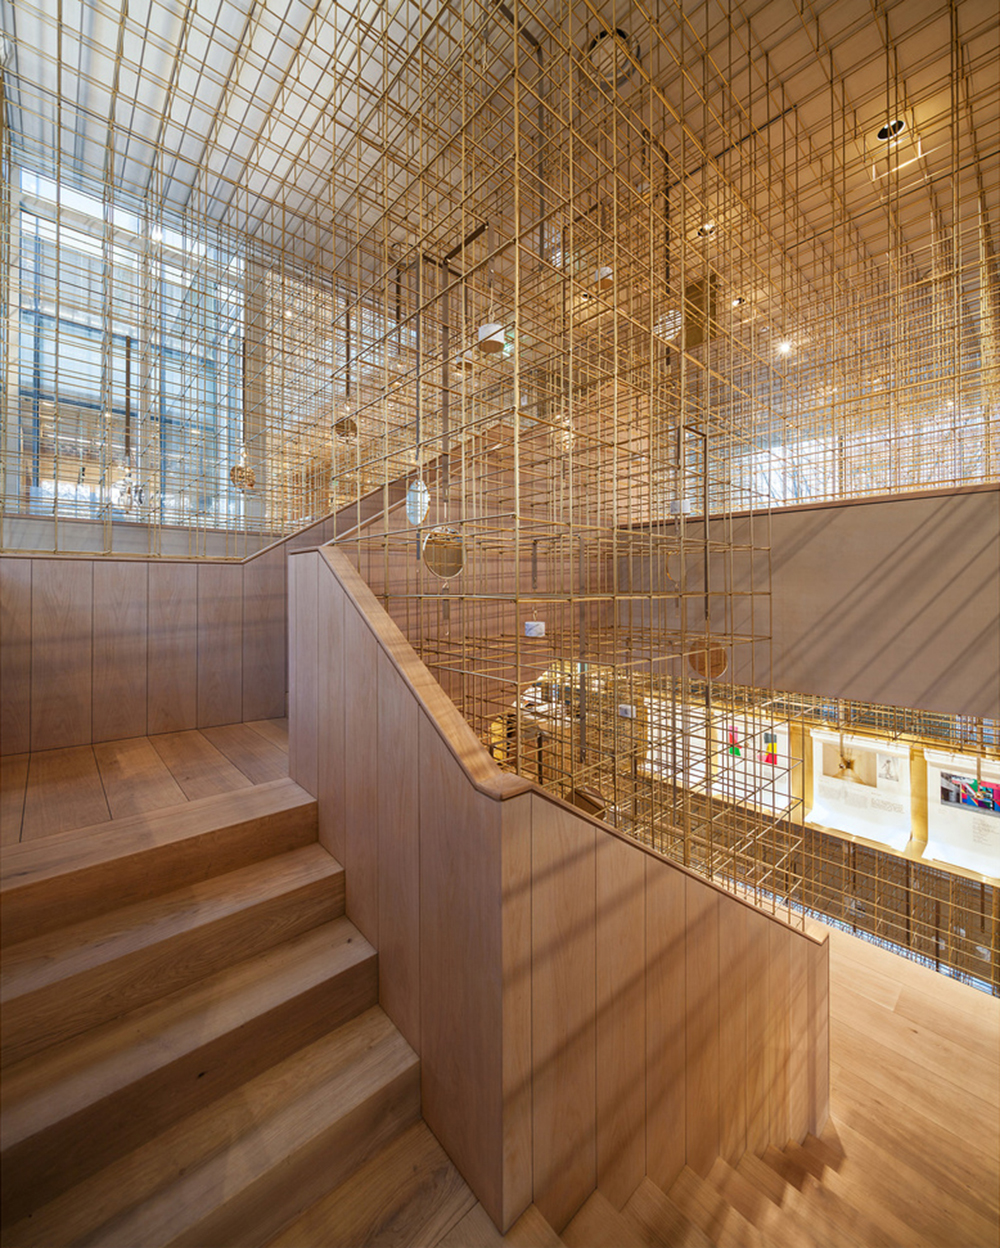 Sulwhasoo_Flagship_Store_photographed_by_Pedro_Pegenaute_(14)副本